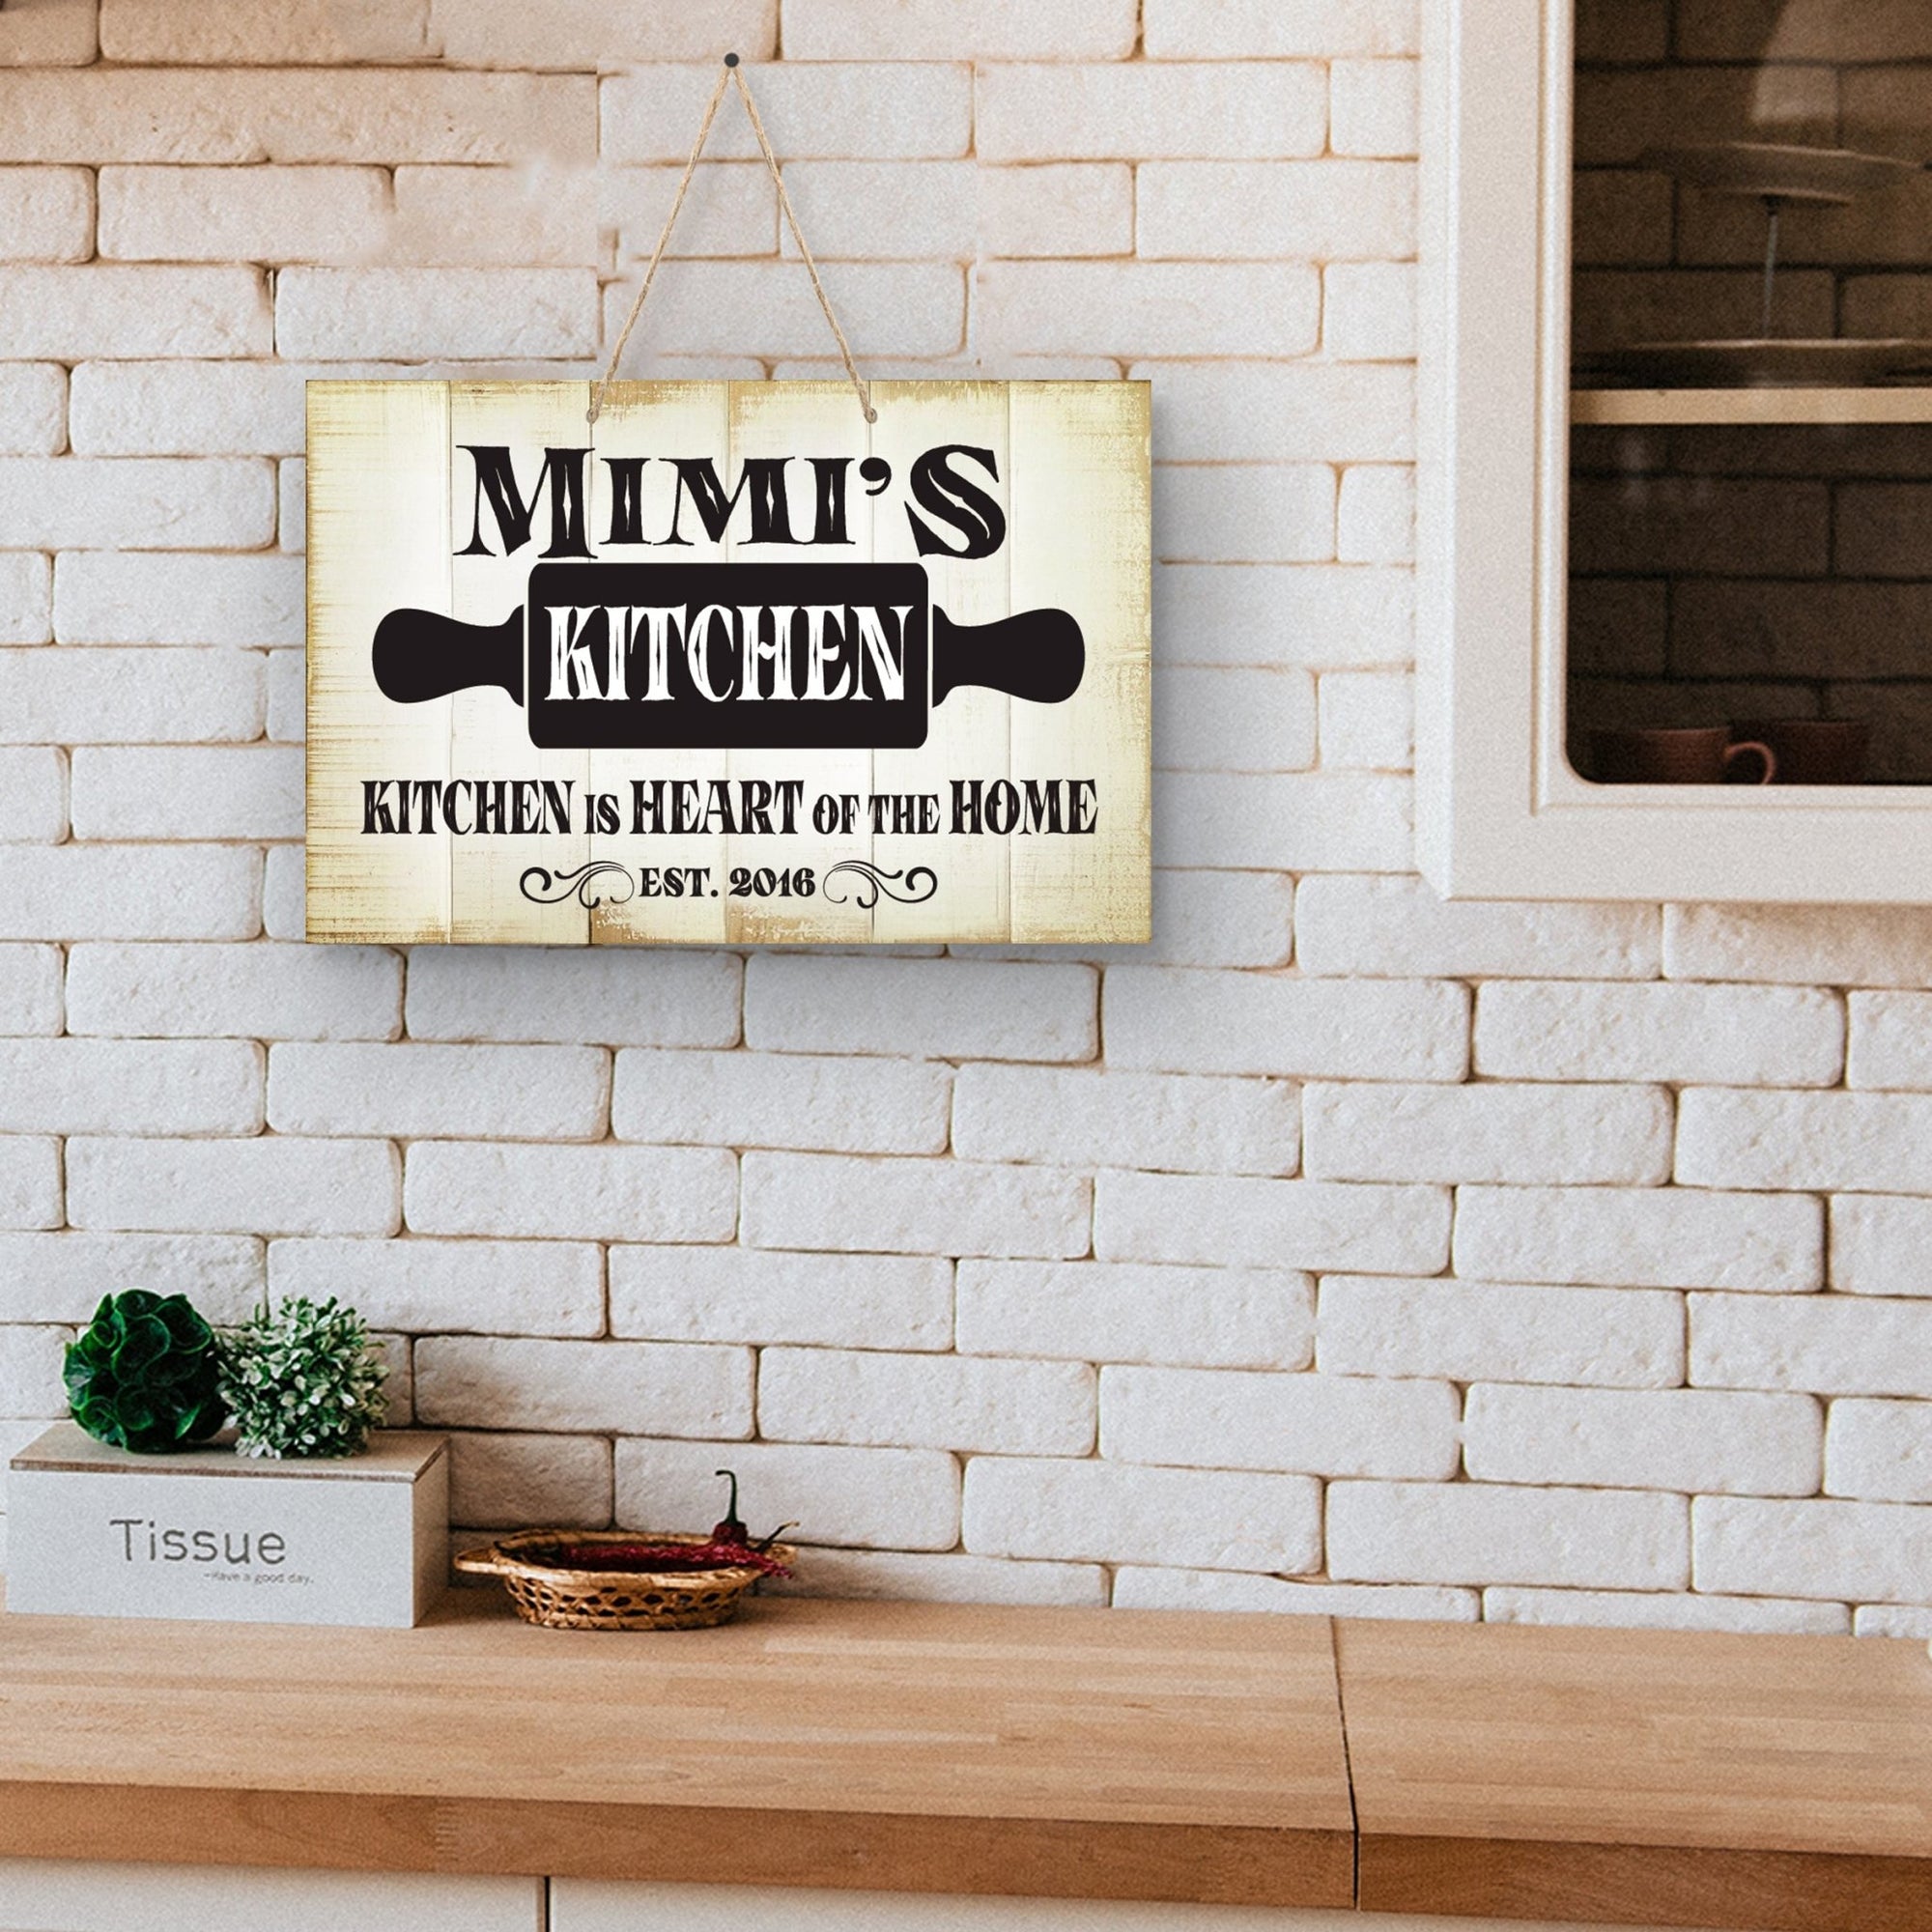 Inspirational Wooden Rustic Wall Hanging Rope Sign Kitchen Home Décor - Kitchen Is Heart - LifeSong Milestones